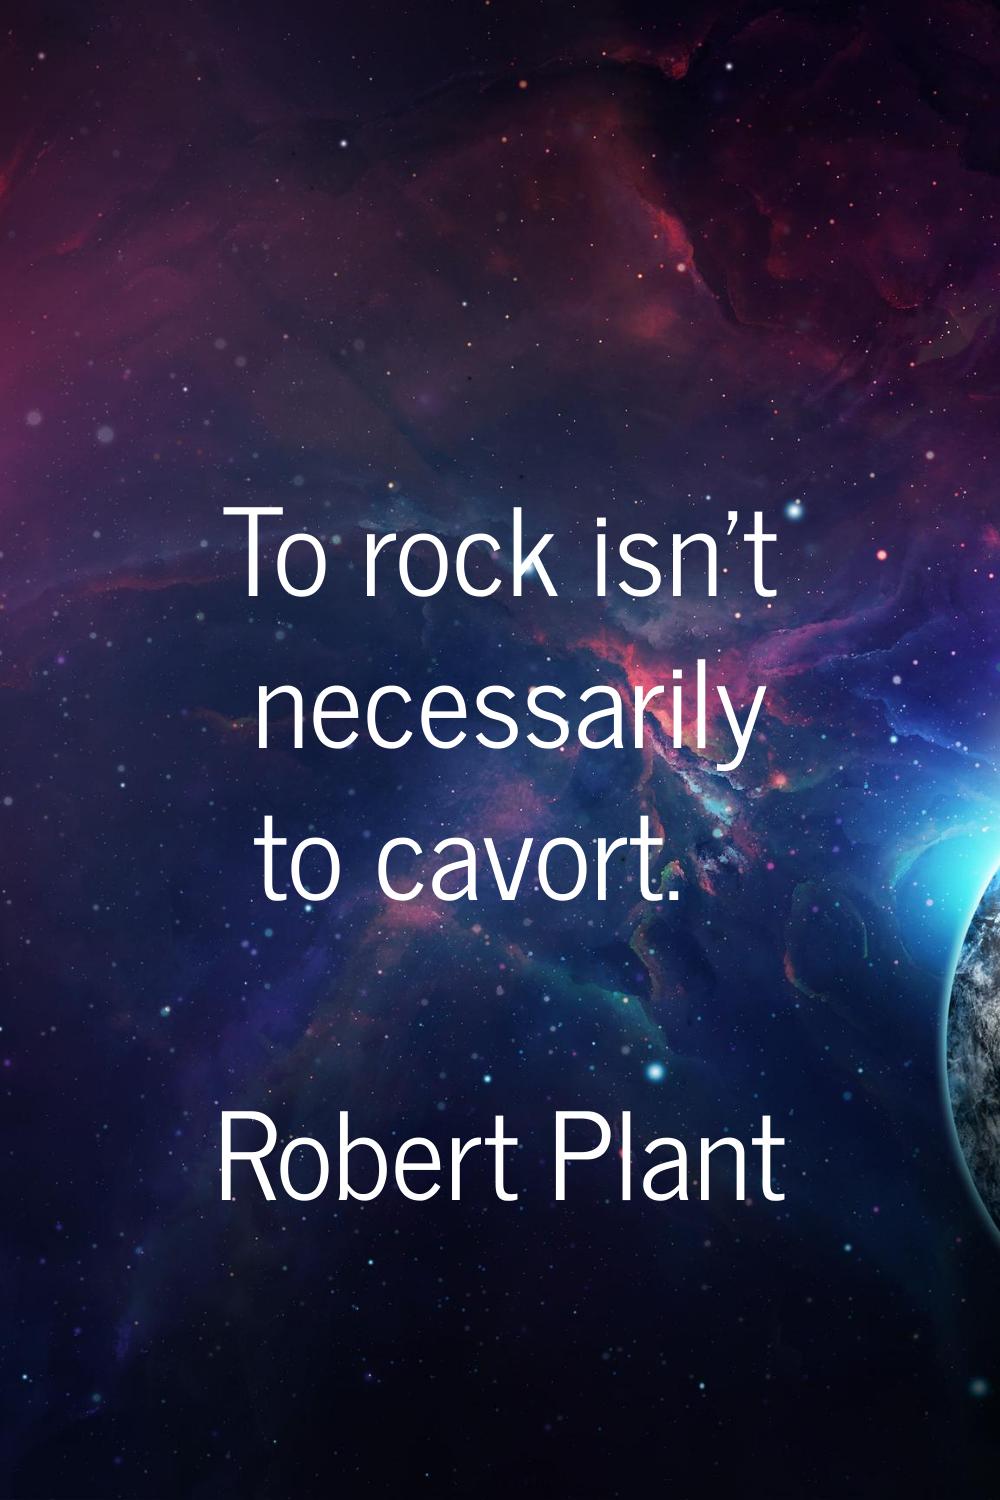 To rock isn't necessarily to cavort.